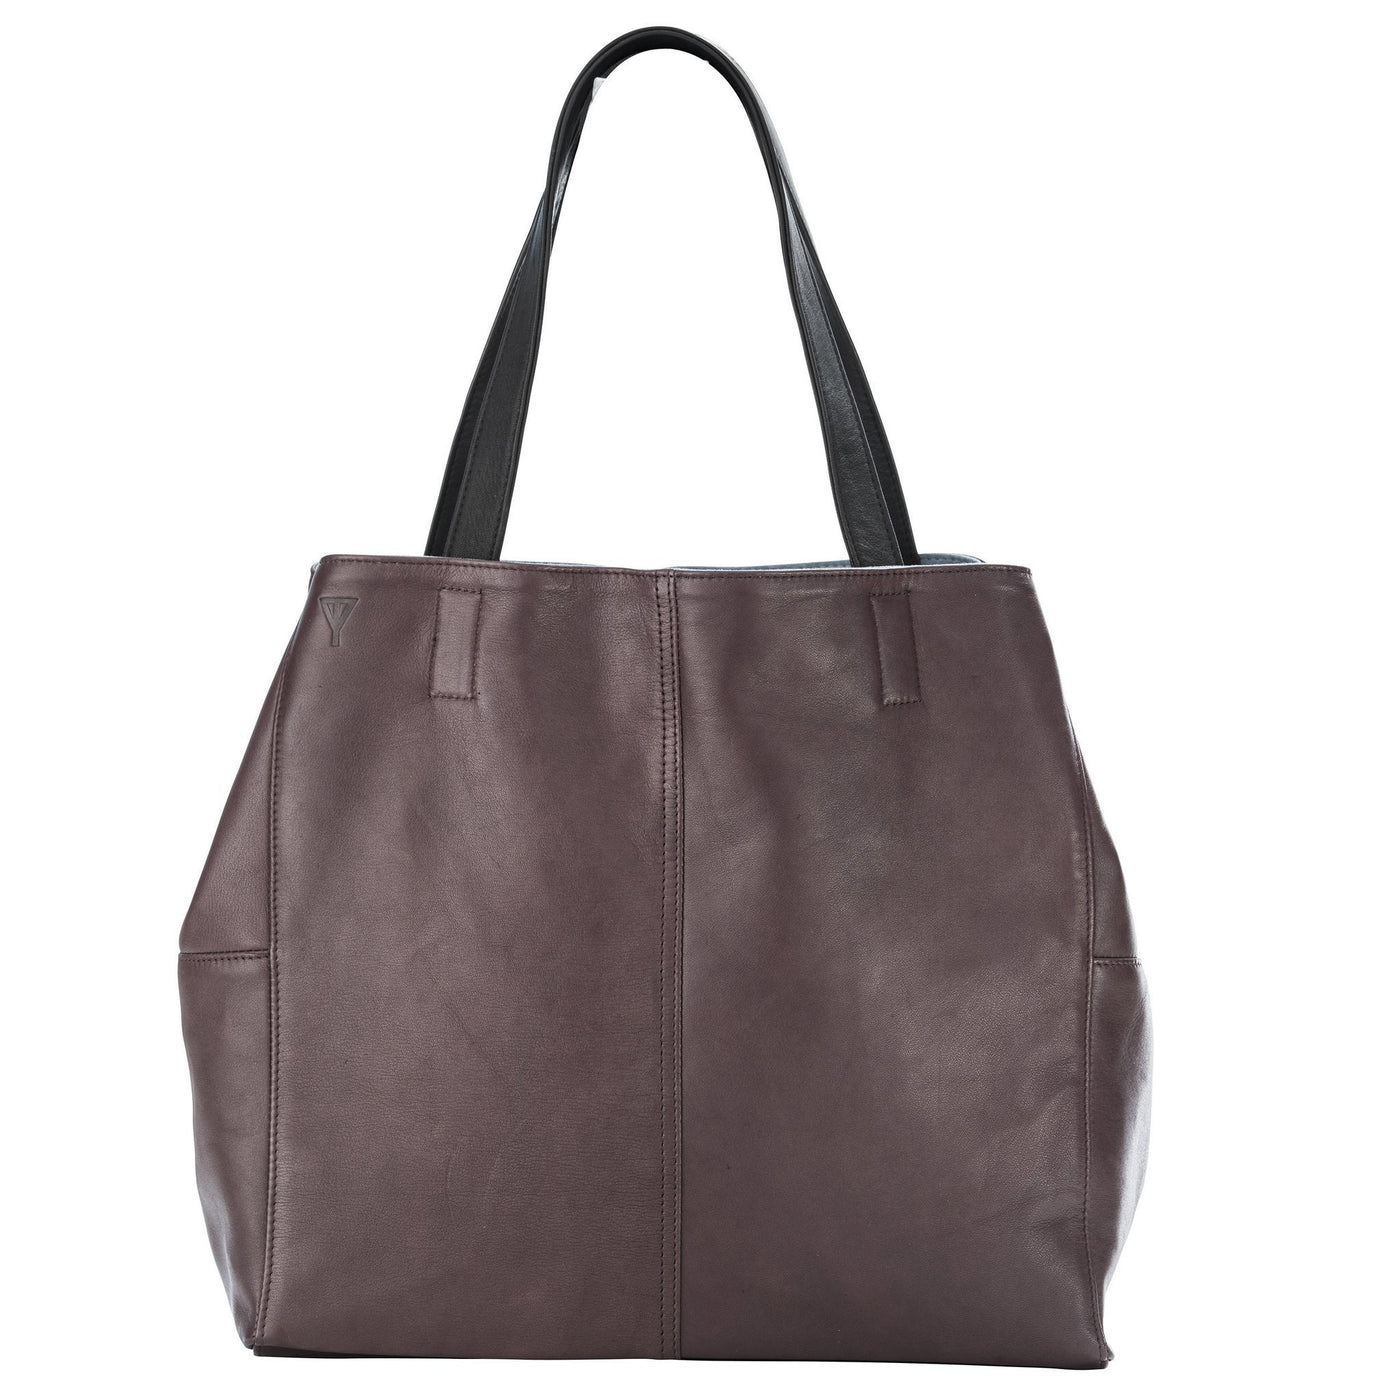 Mary Classic Tote - The Clothing LoungeTaylor Yates